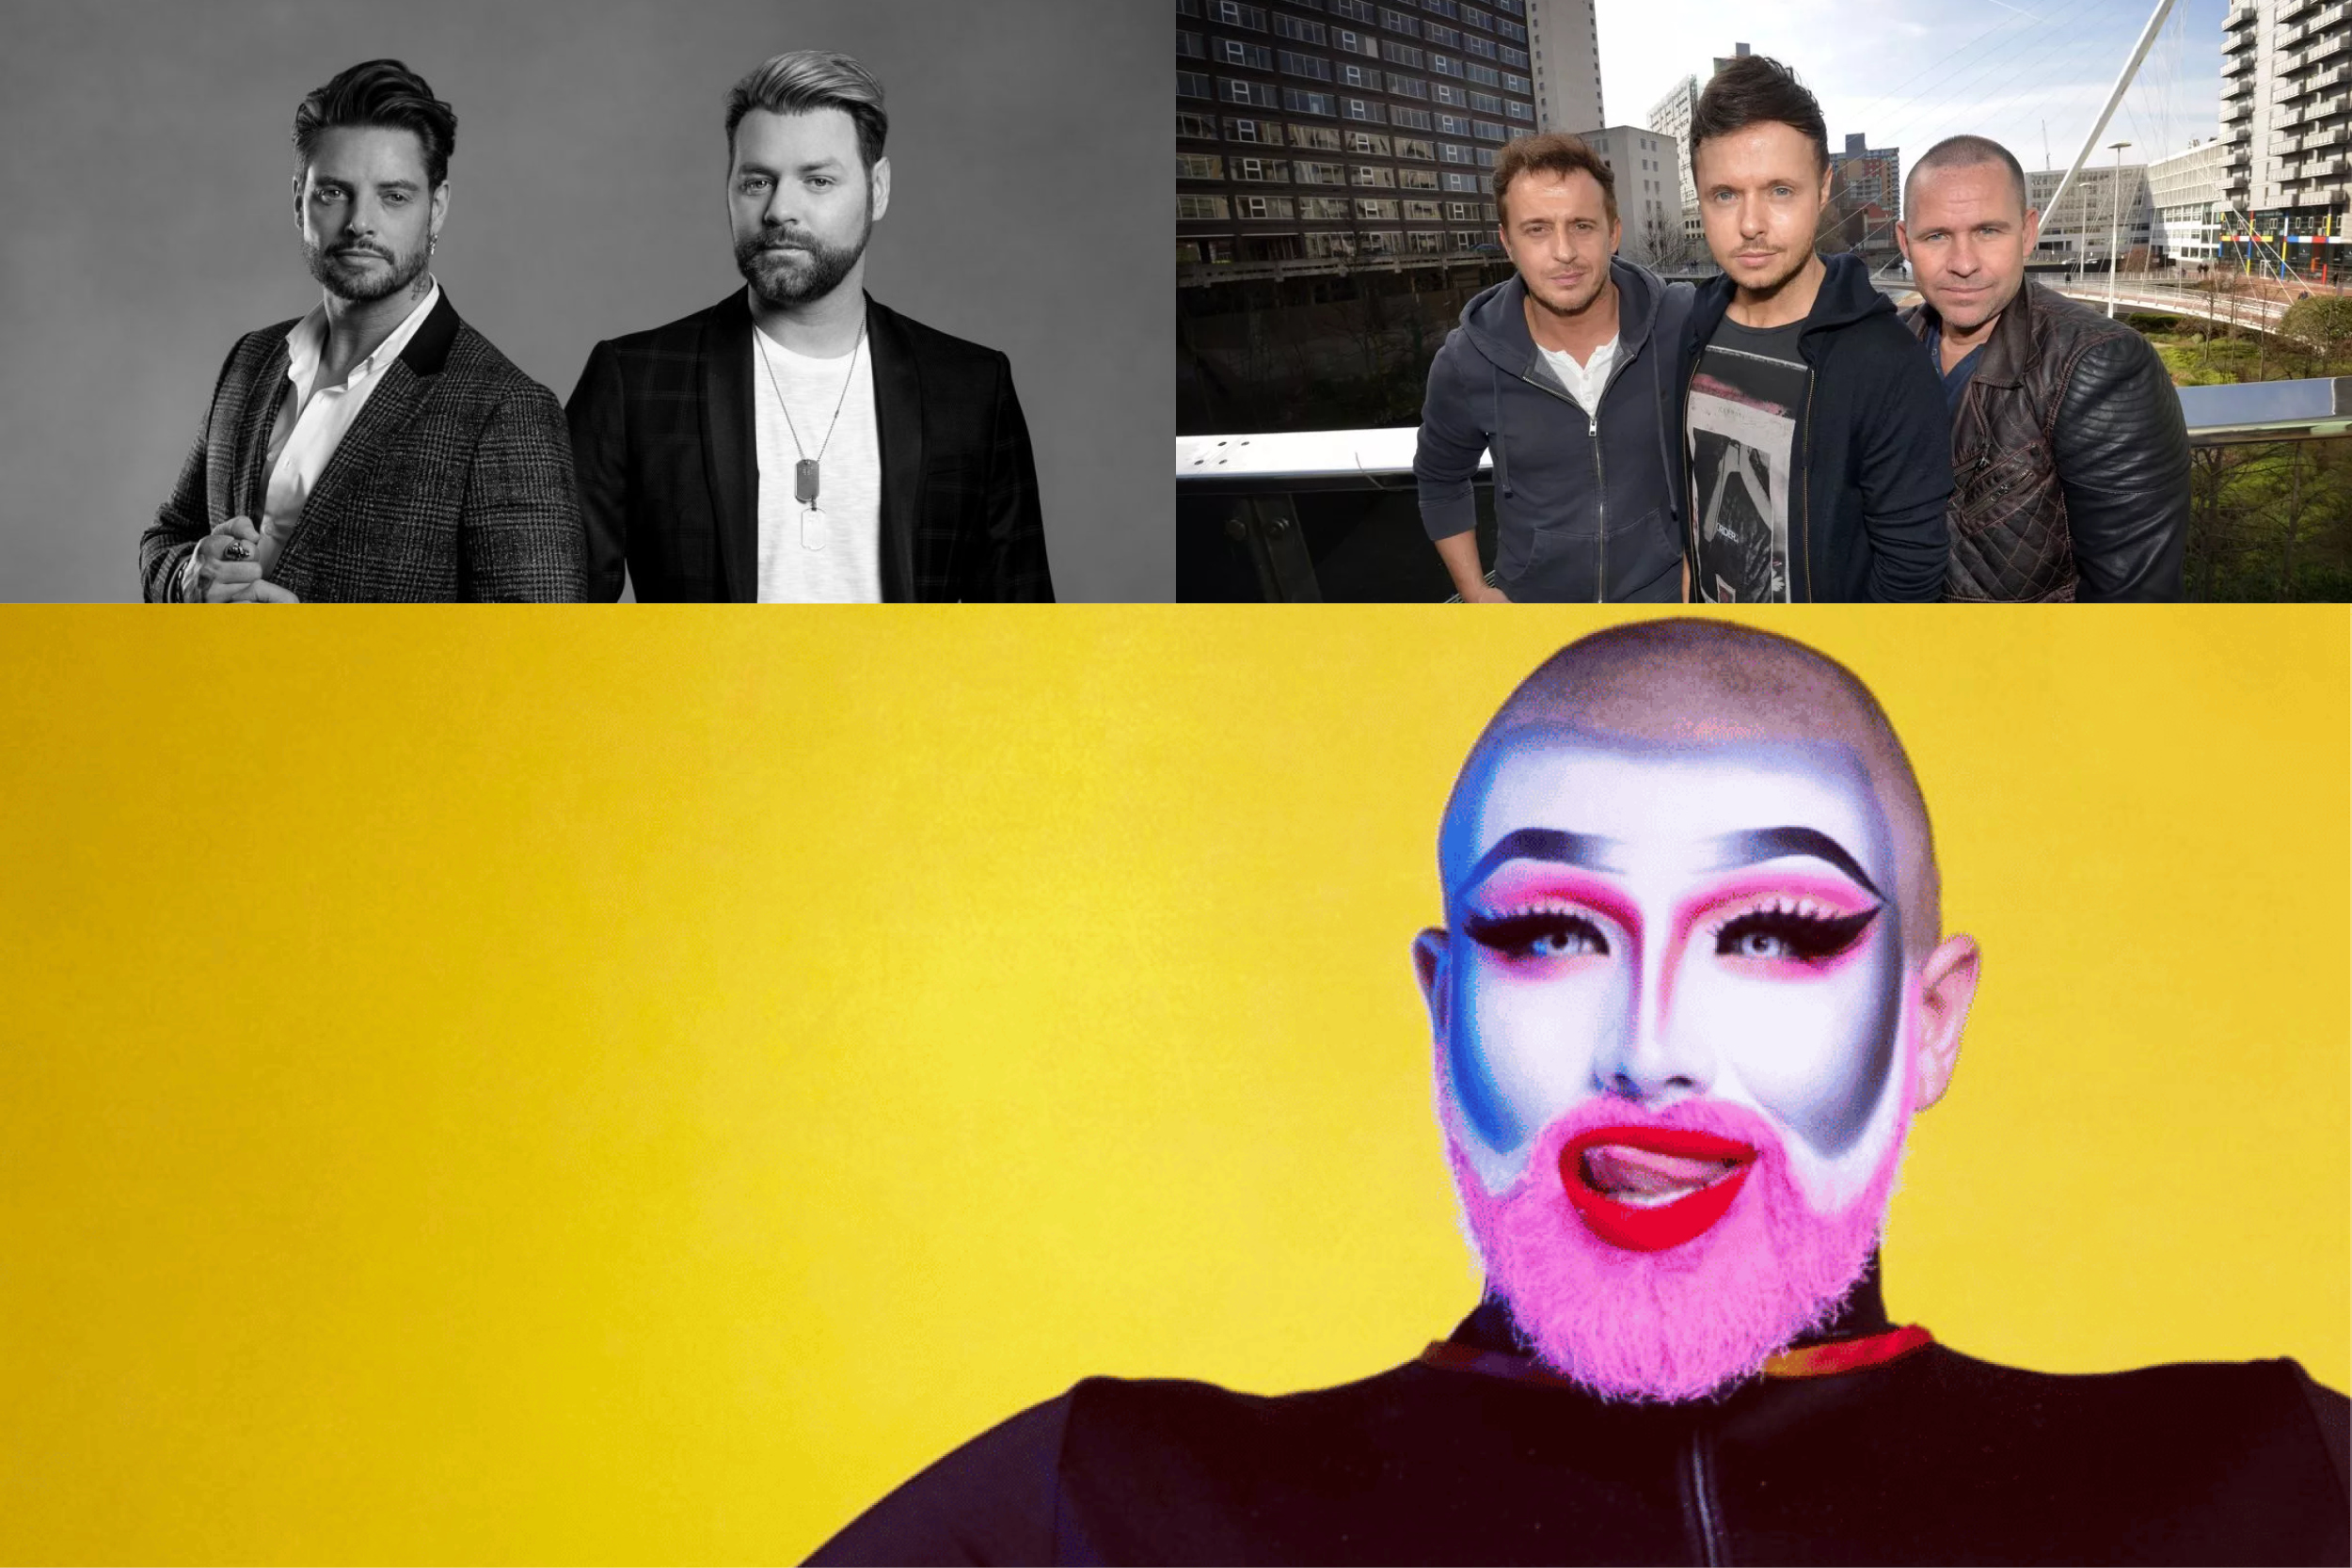 Boyzlife, Danny Beard and 911 announced for this year’s Worthing Pride